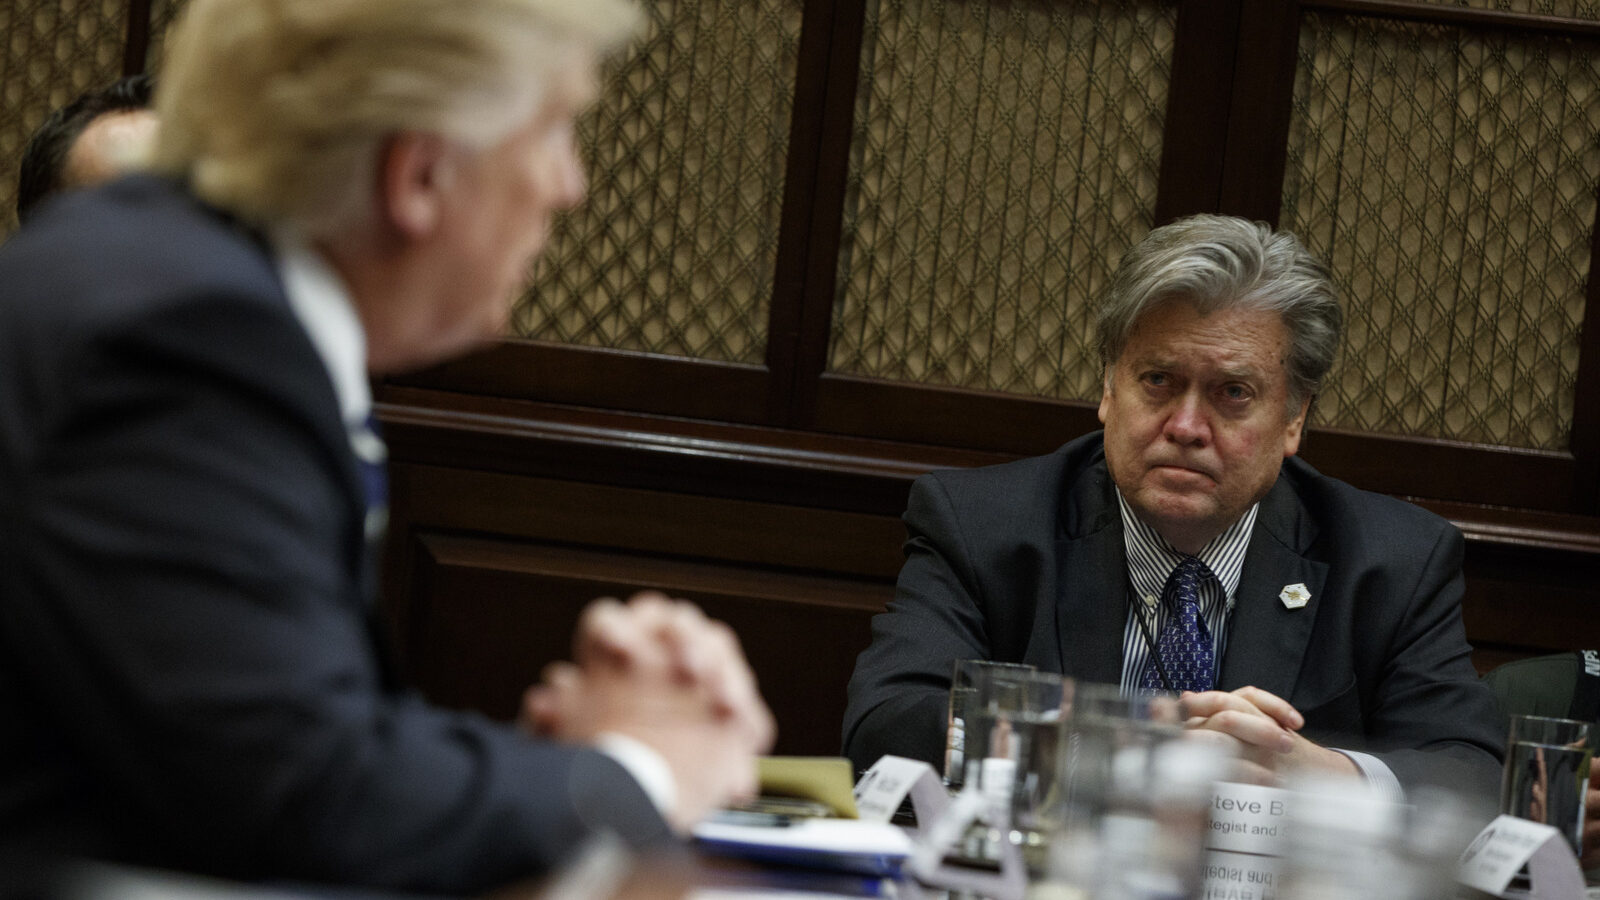 White House Chief Strategist Steve Bannon listens as President Donald Trump speaks in the Roosevelt Room of the White House in Washington, Tuesday, Jan. 31, 2017. (AP/Evan Vucci)